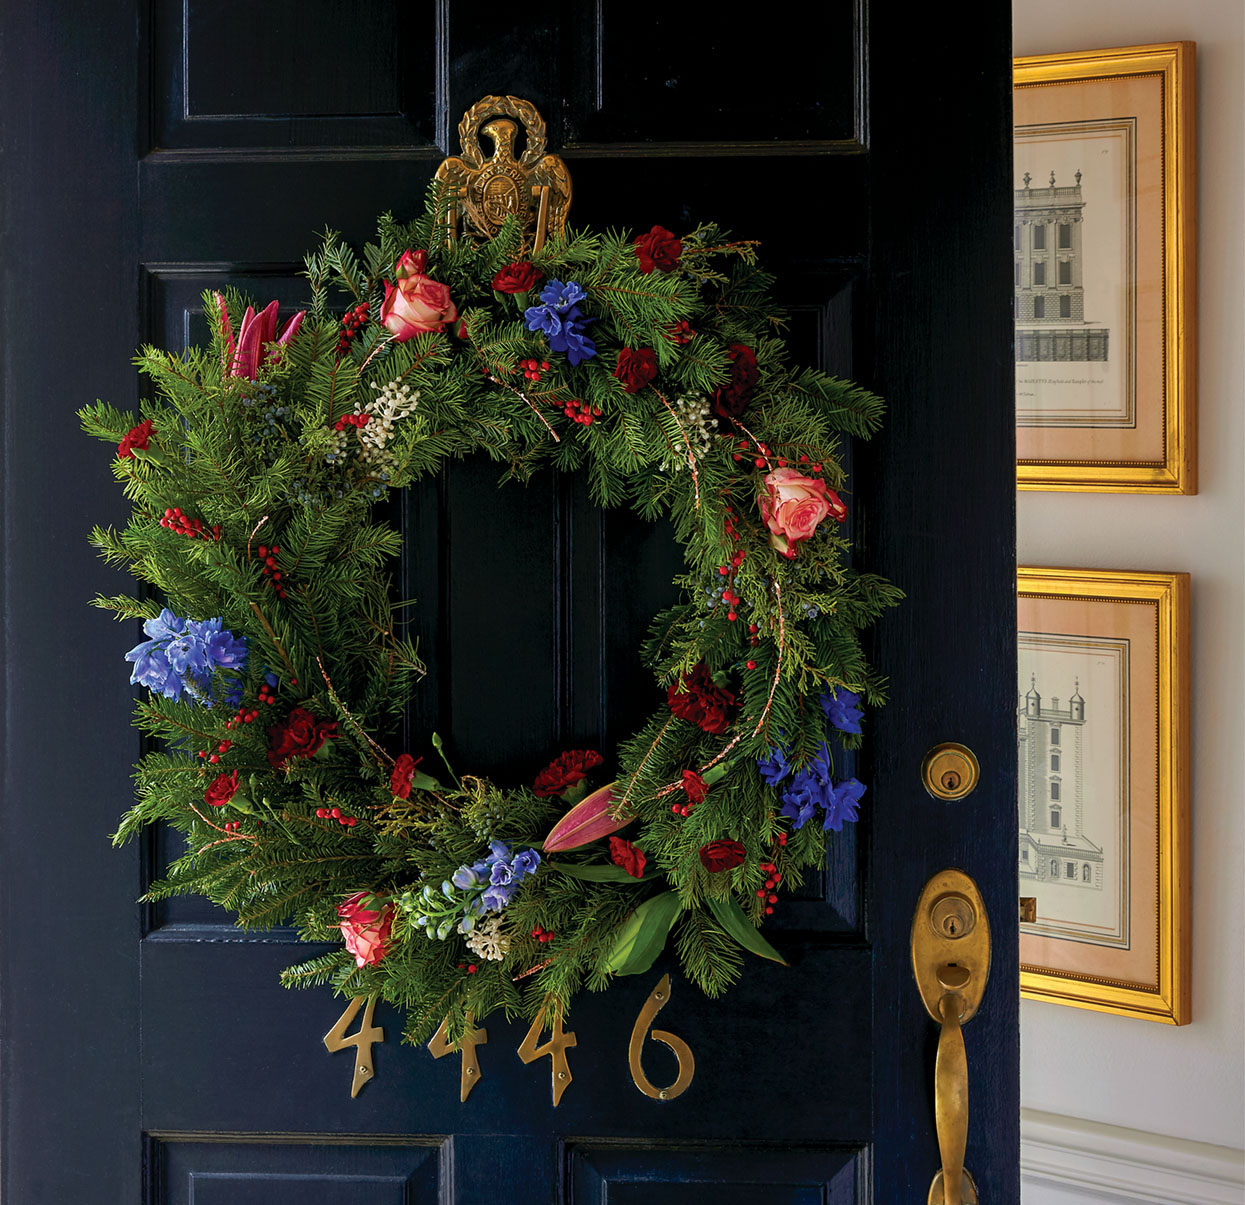 Evergreen Christmas wreath with roses, lilies, and other fresh flowers